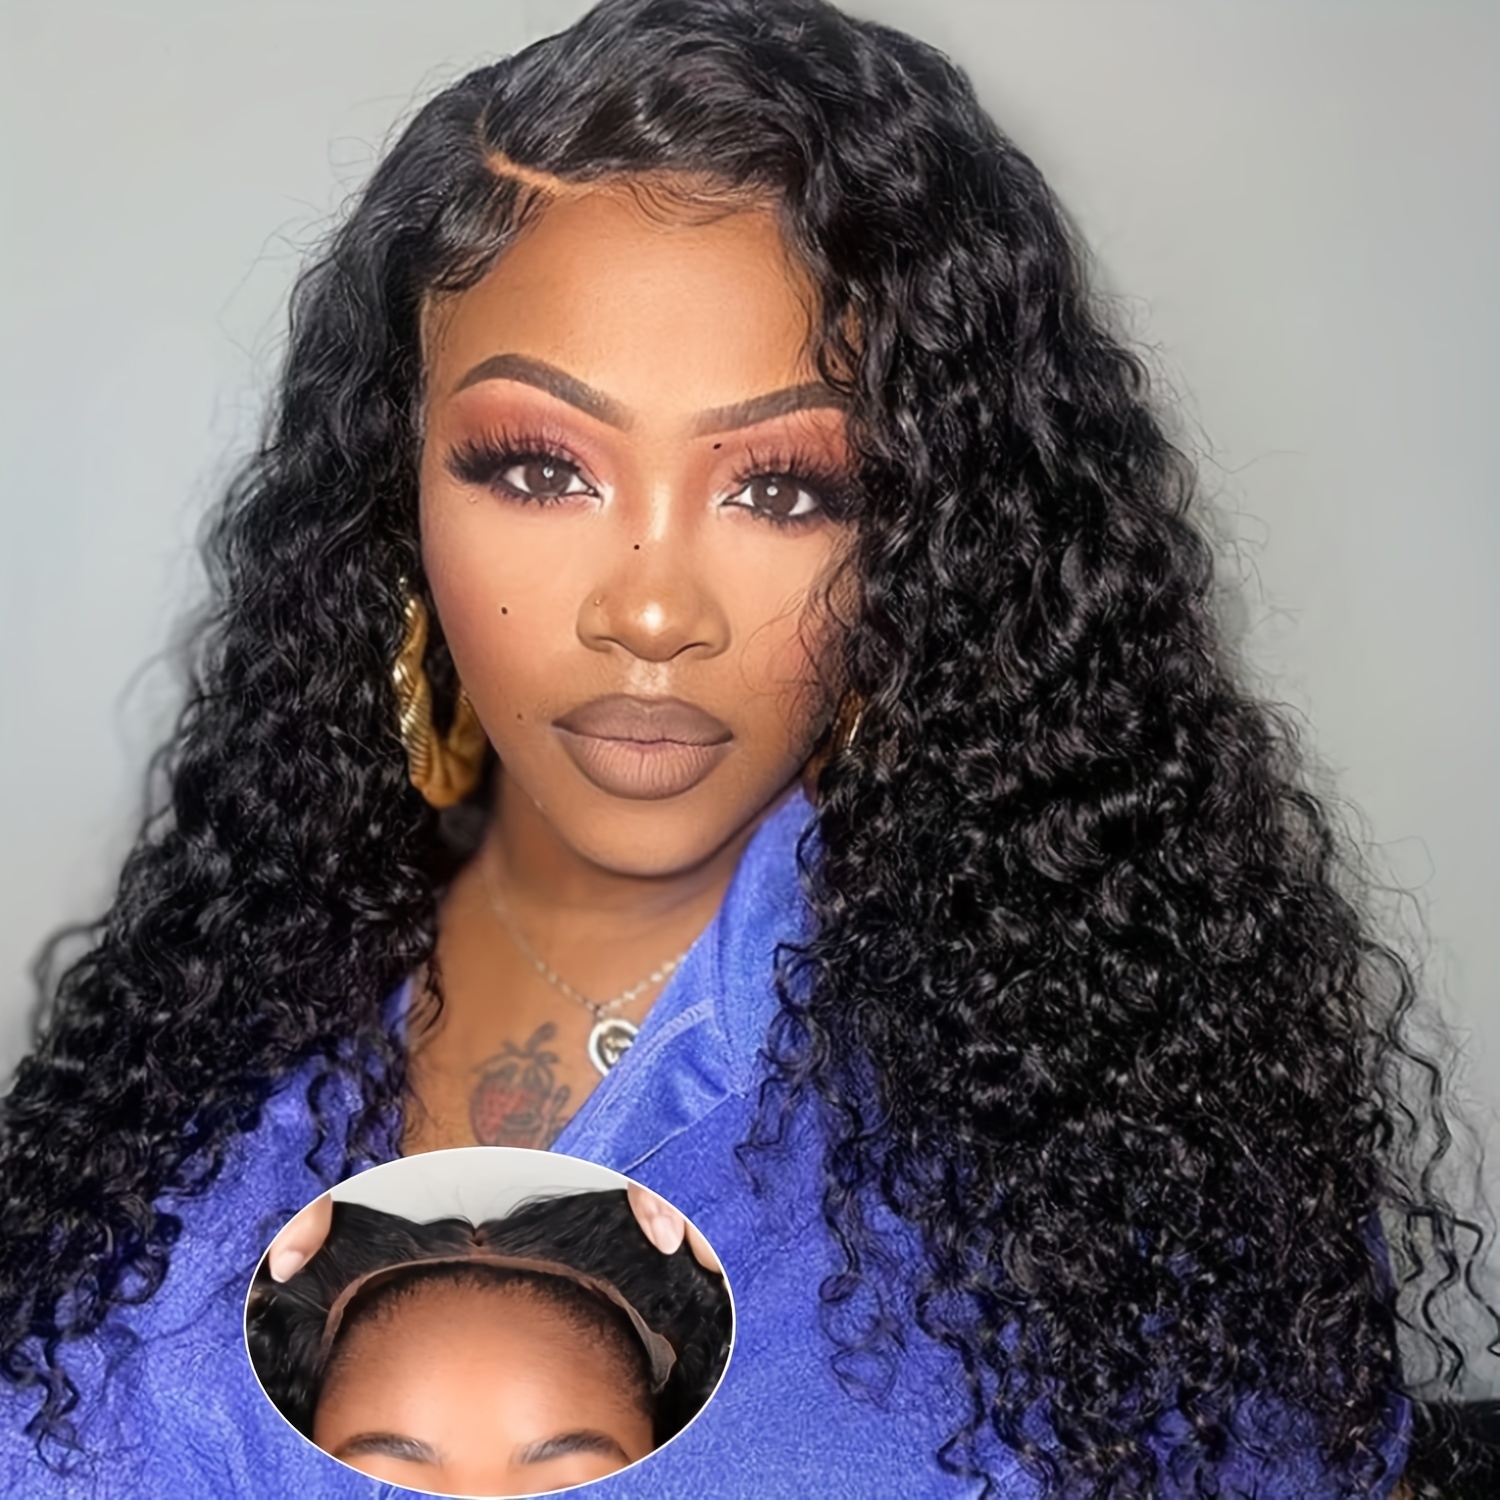  32 Inch 13x4 Transparent Lace Front Wigs Human Hair Curly  Human Hair Wigs for Black Women 200% Density Glueless Lace Frontal Wigs  Brazilian Virgin Human Hair Pre Plucked Bleached Knots